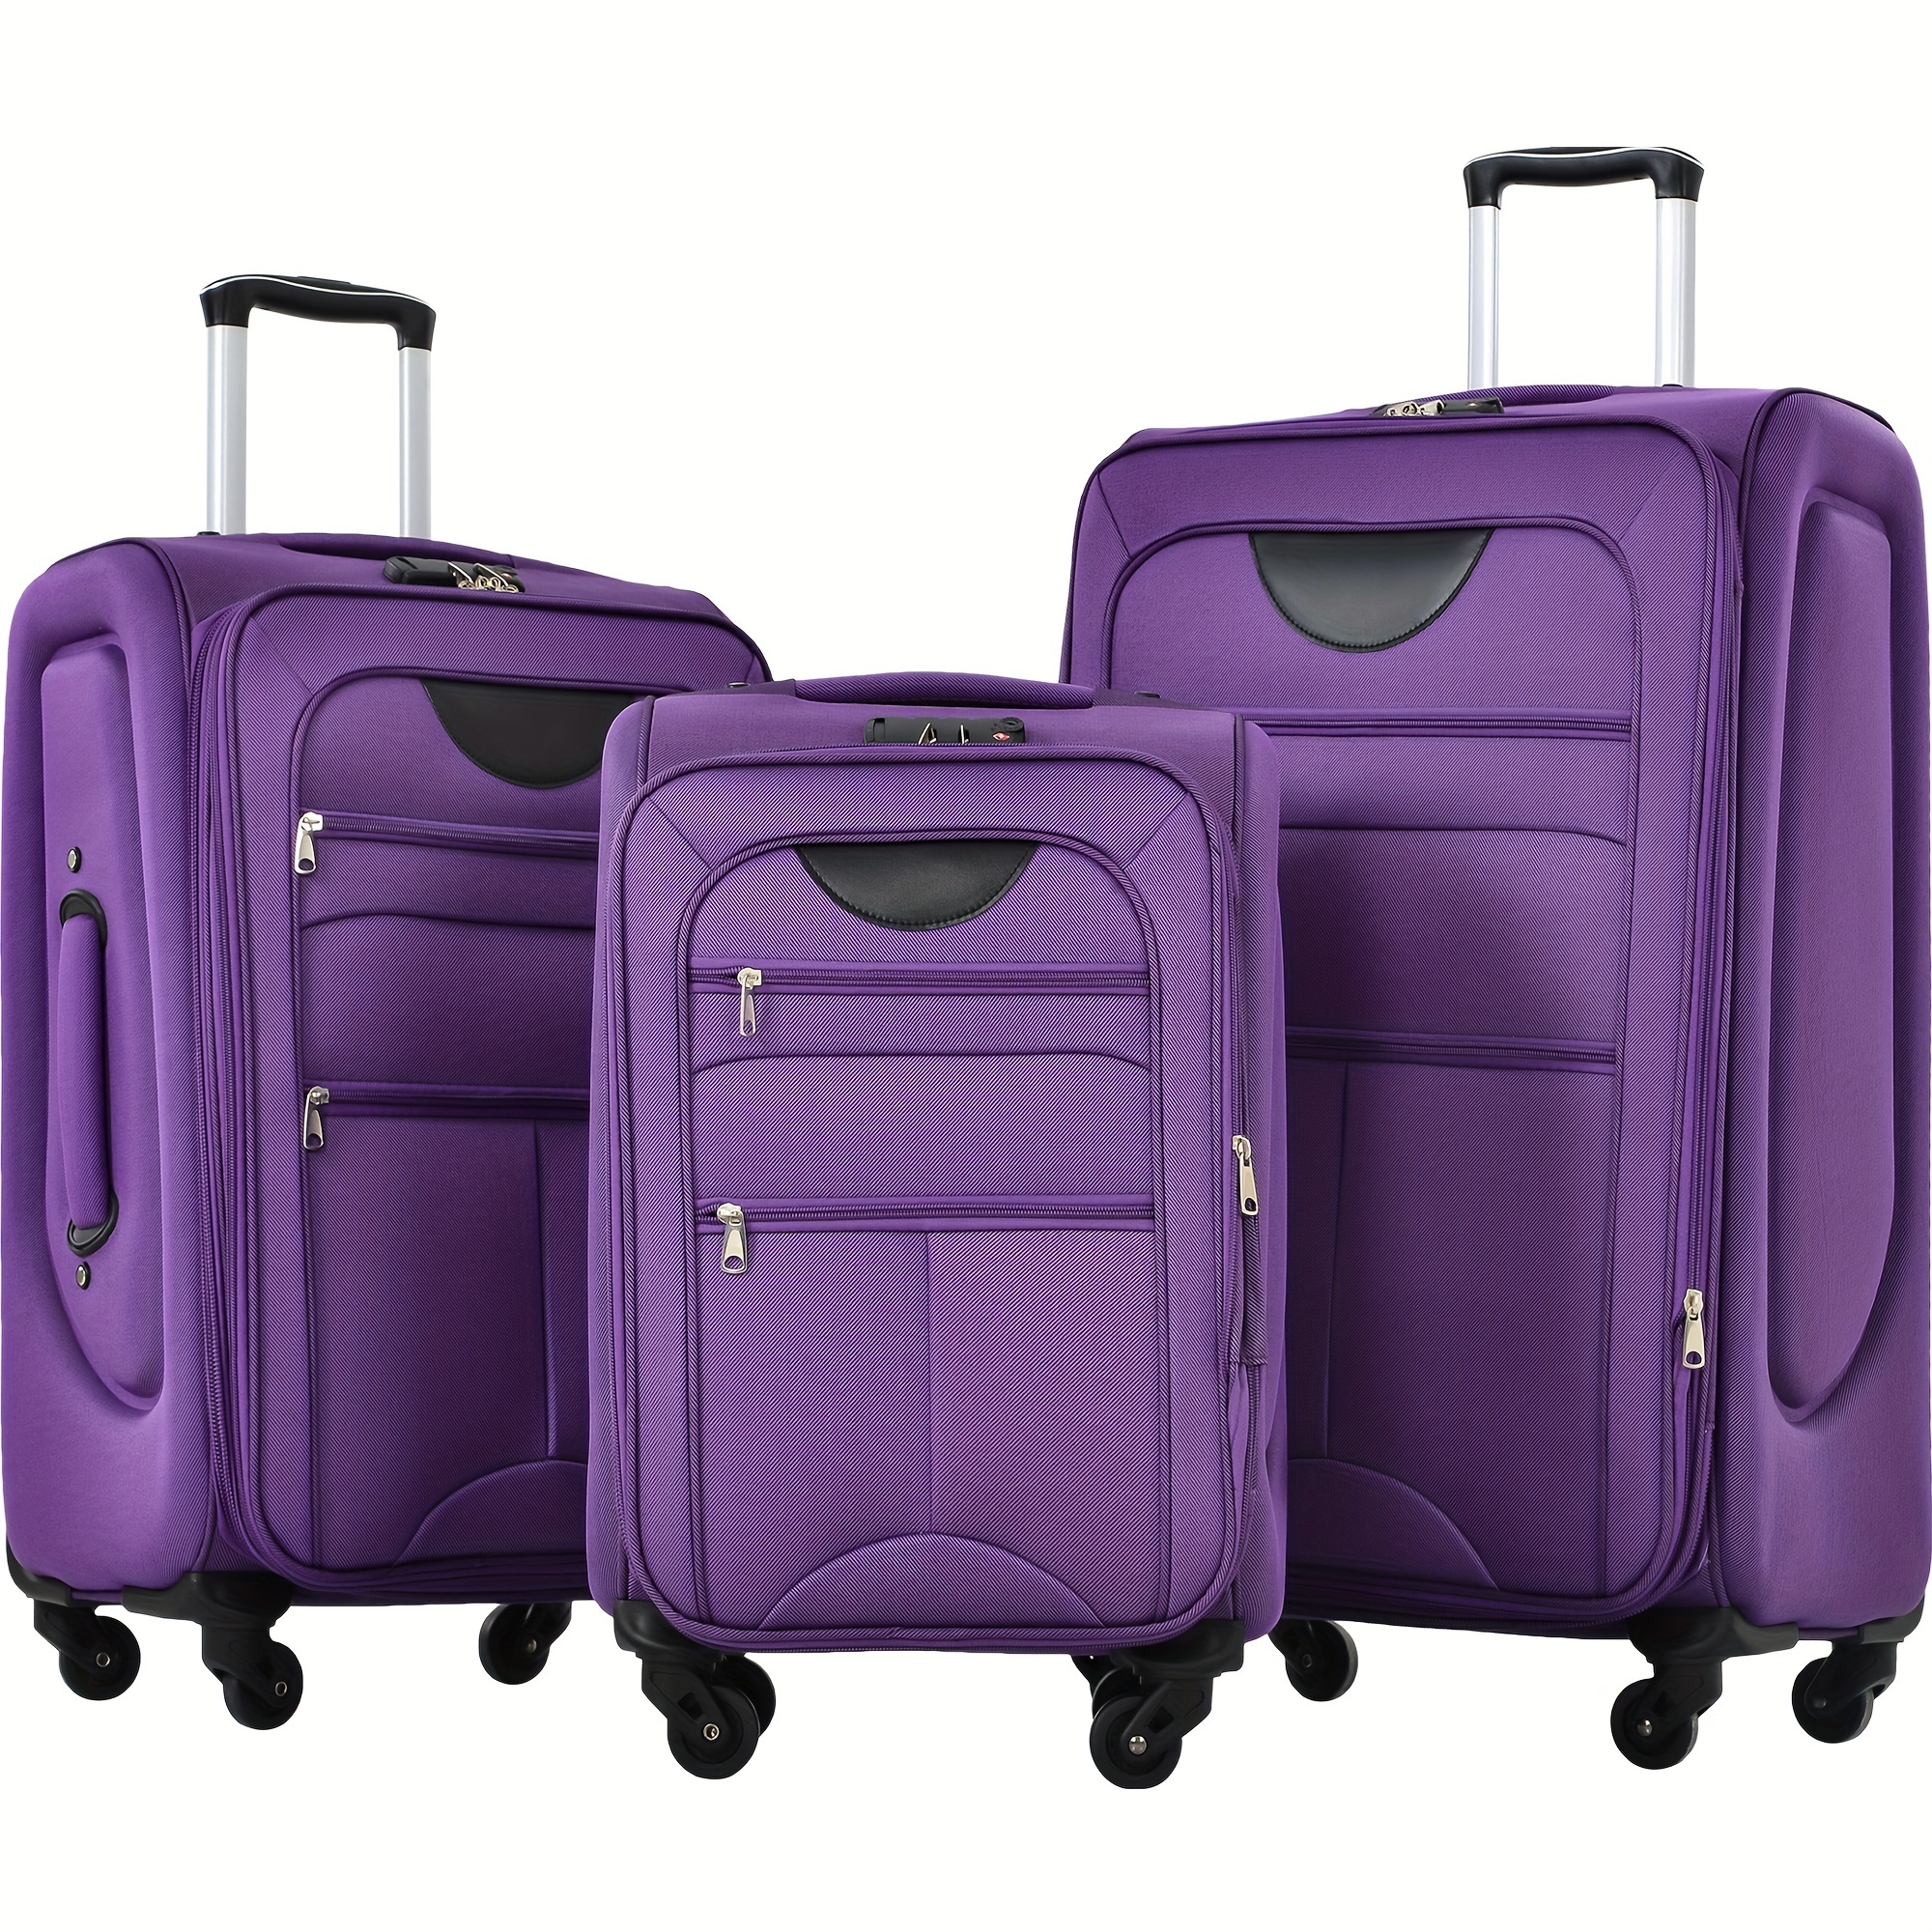 

3 Pcs Solid Color Luggage Set - Lightweight With Spinner Wheels Suitcases For Effortless Travel